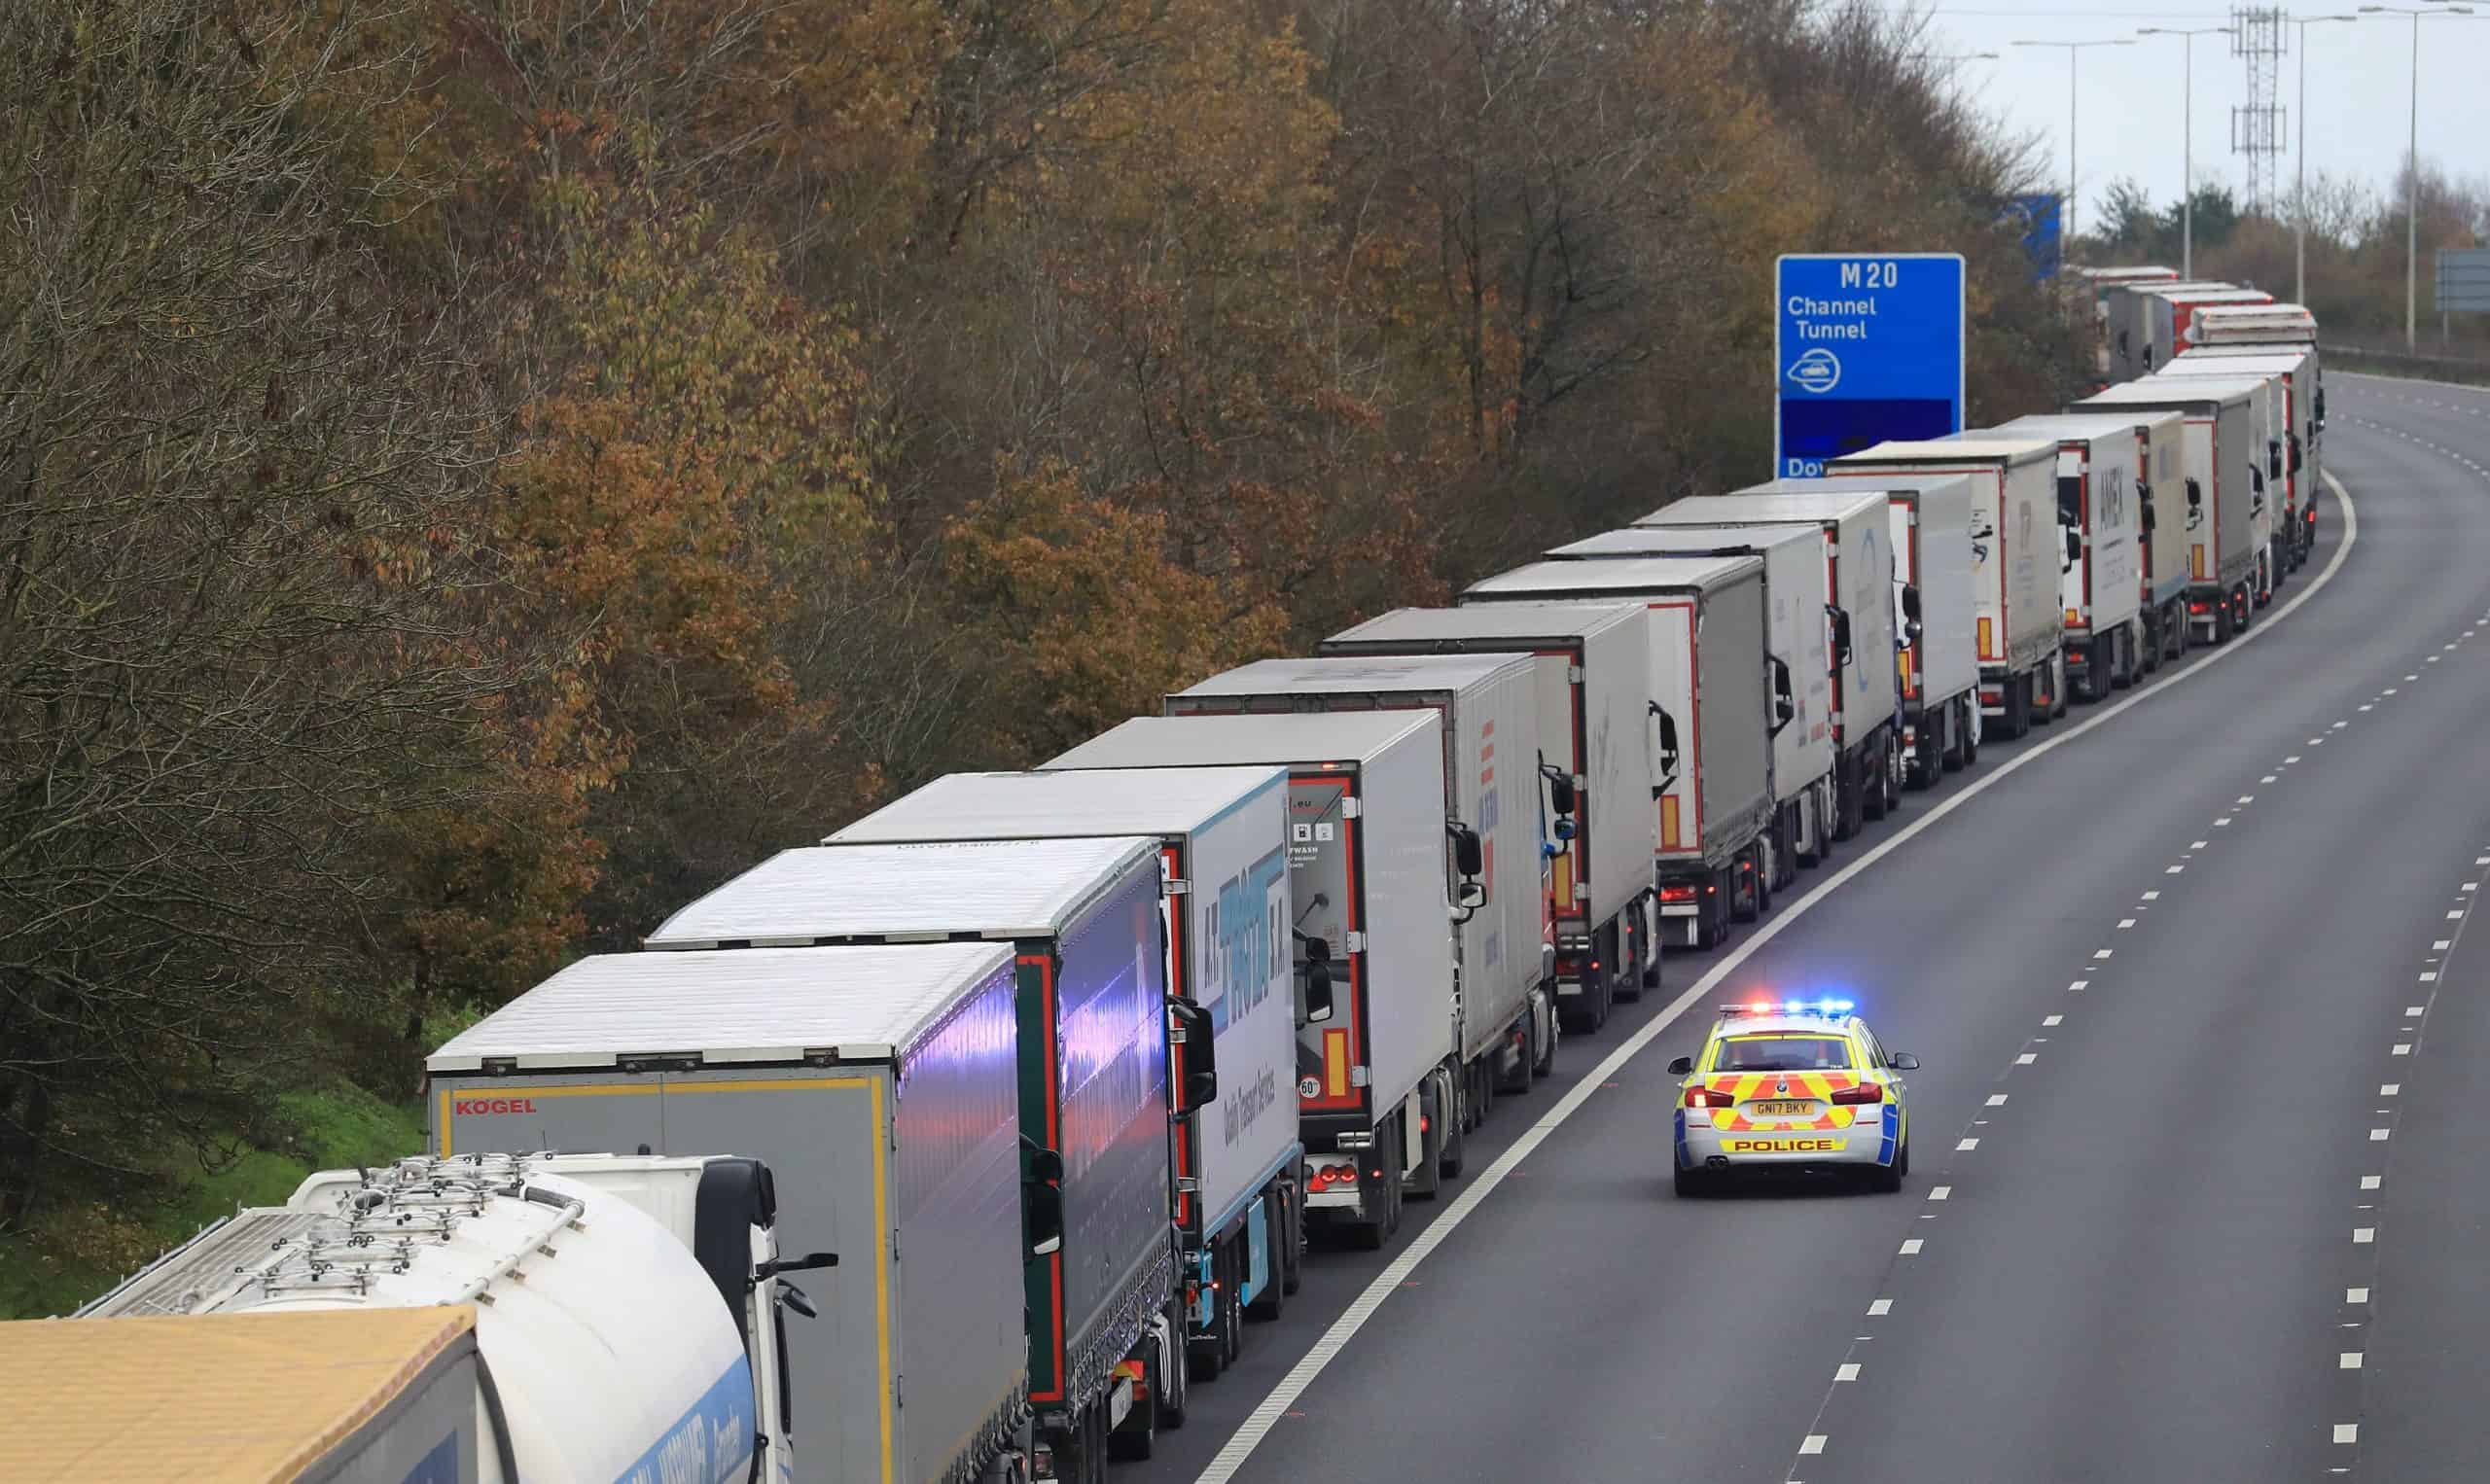 ‘Queuing for the Sunlit Uplands’ – Reactions as miles-long Brexit lorry queues stretch across Kent